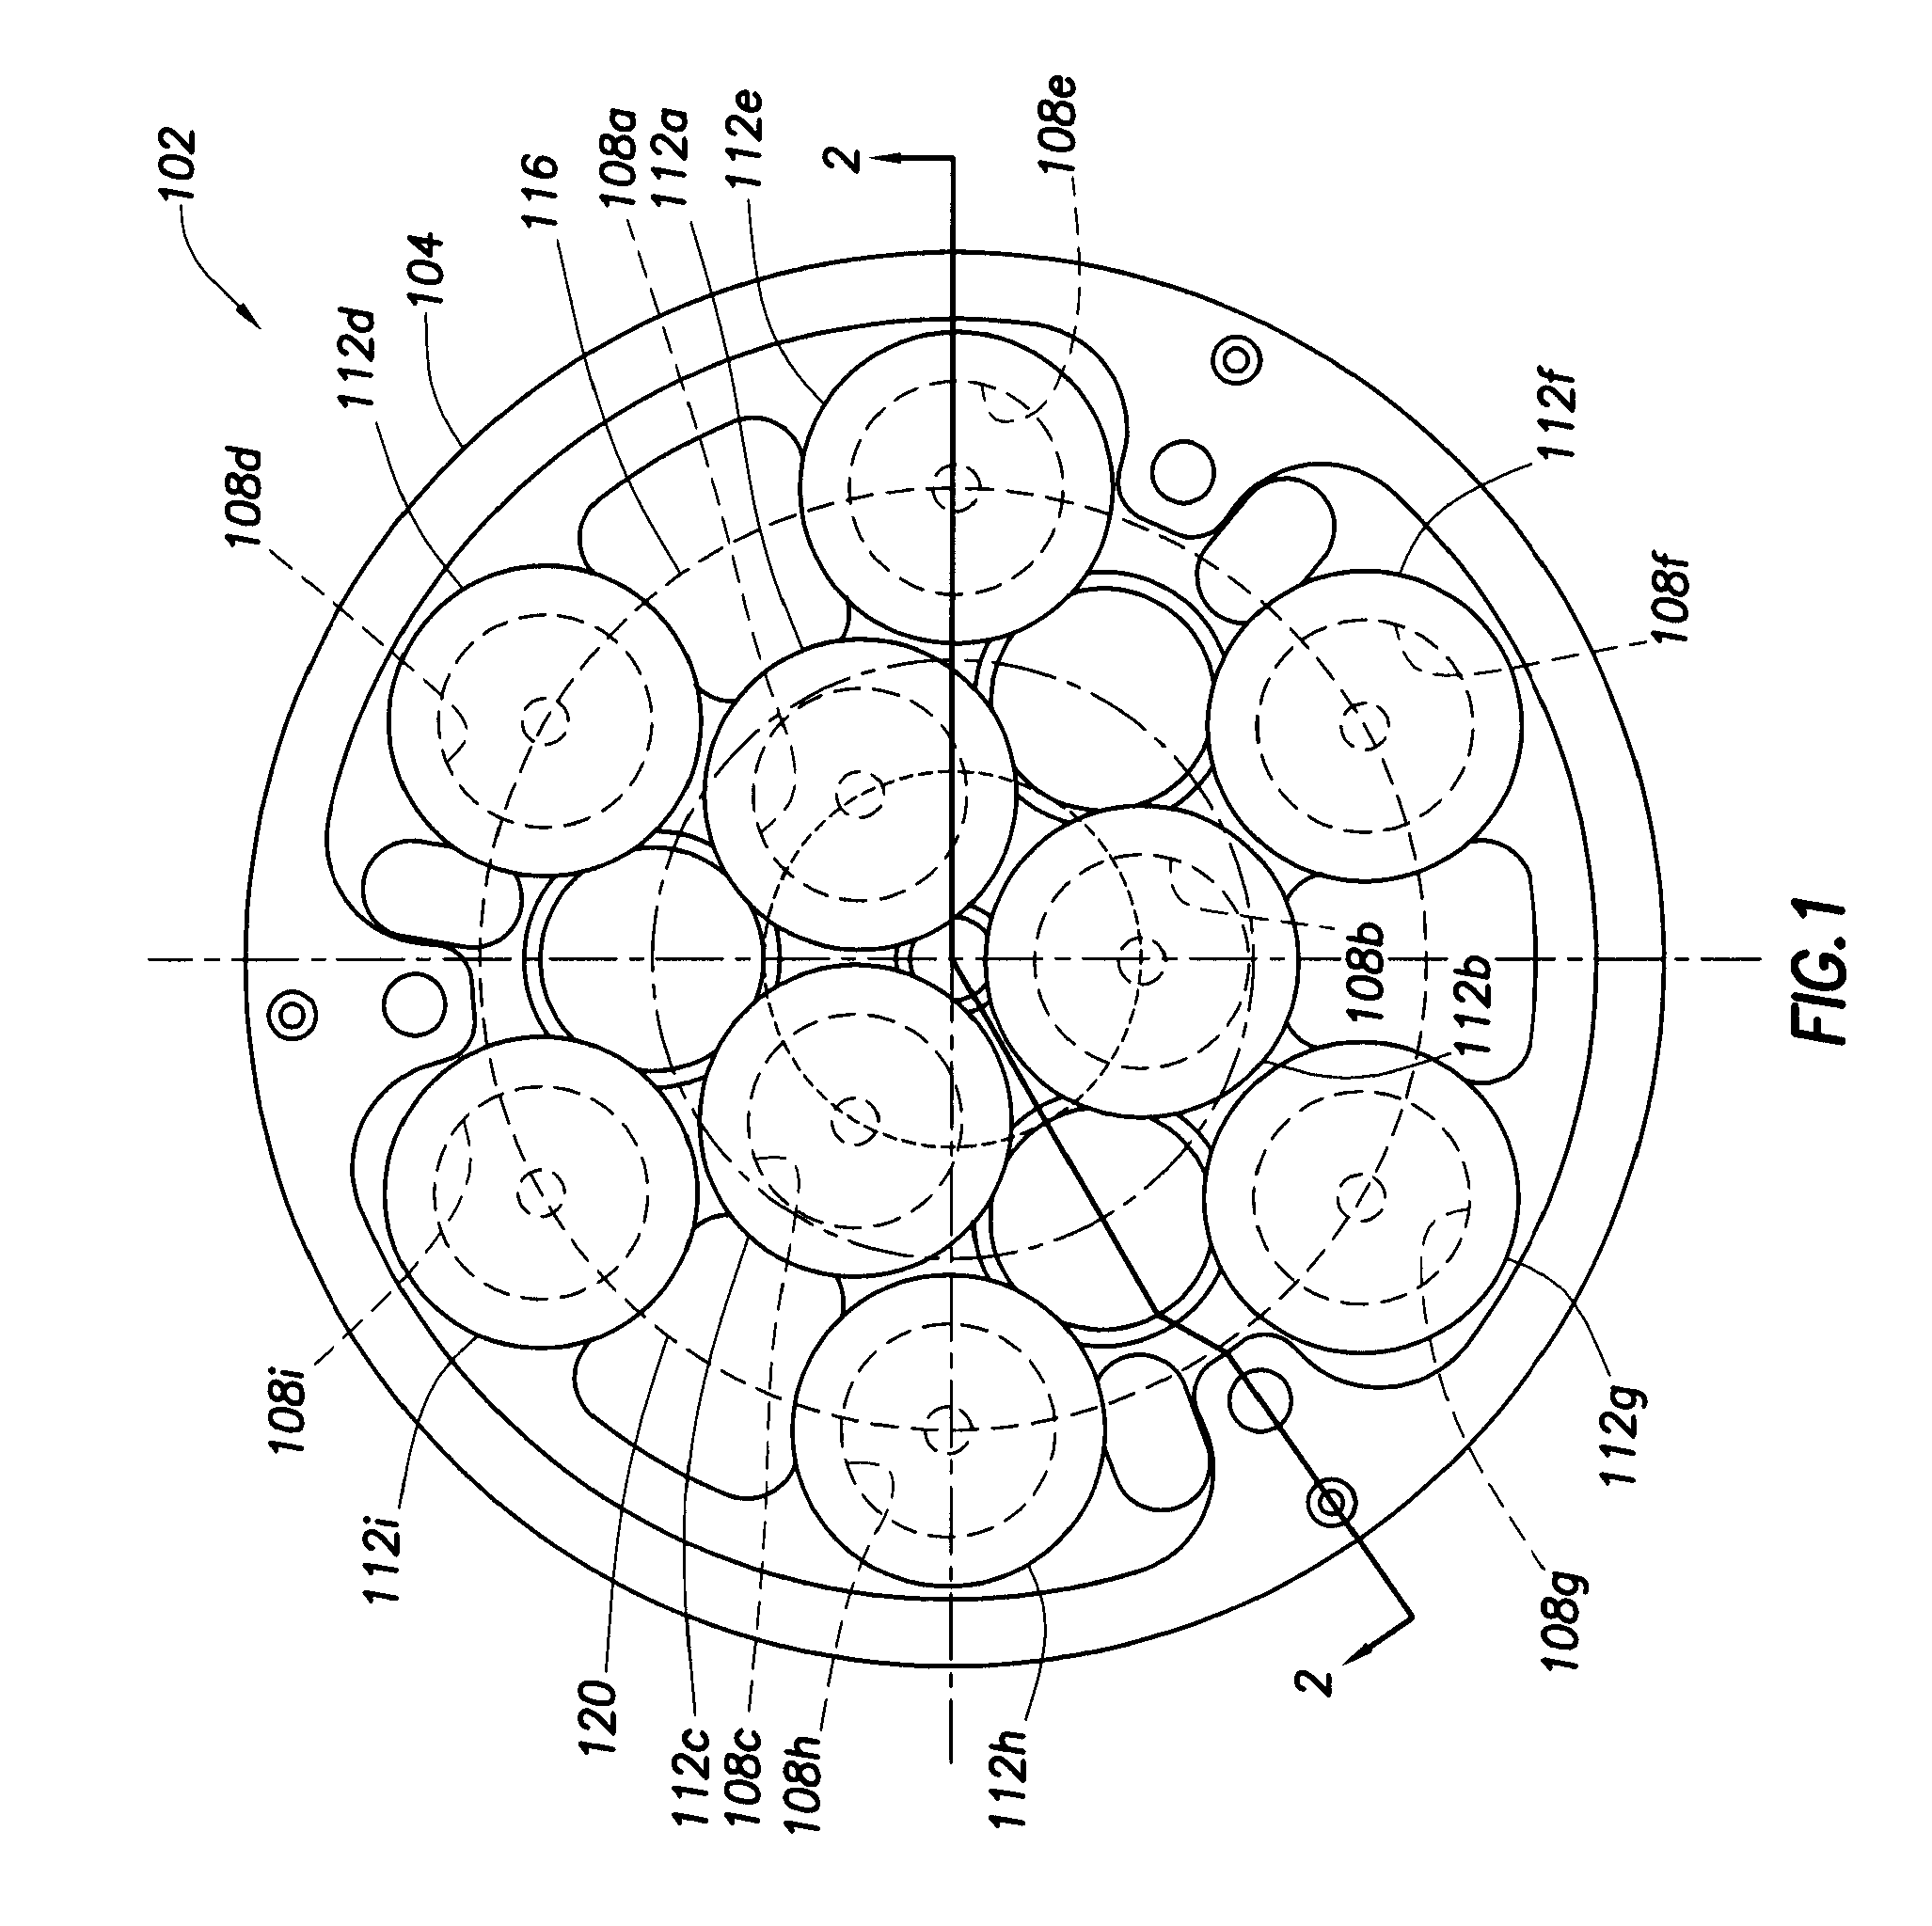 Poppet valve assembly, system, and apparatus for use in high speed compressor applications